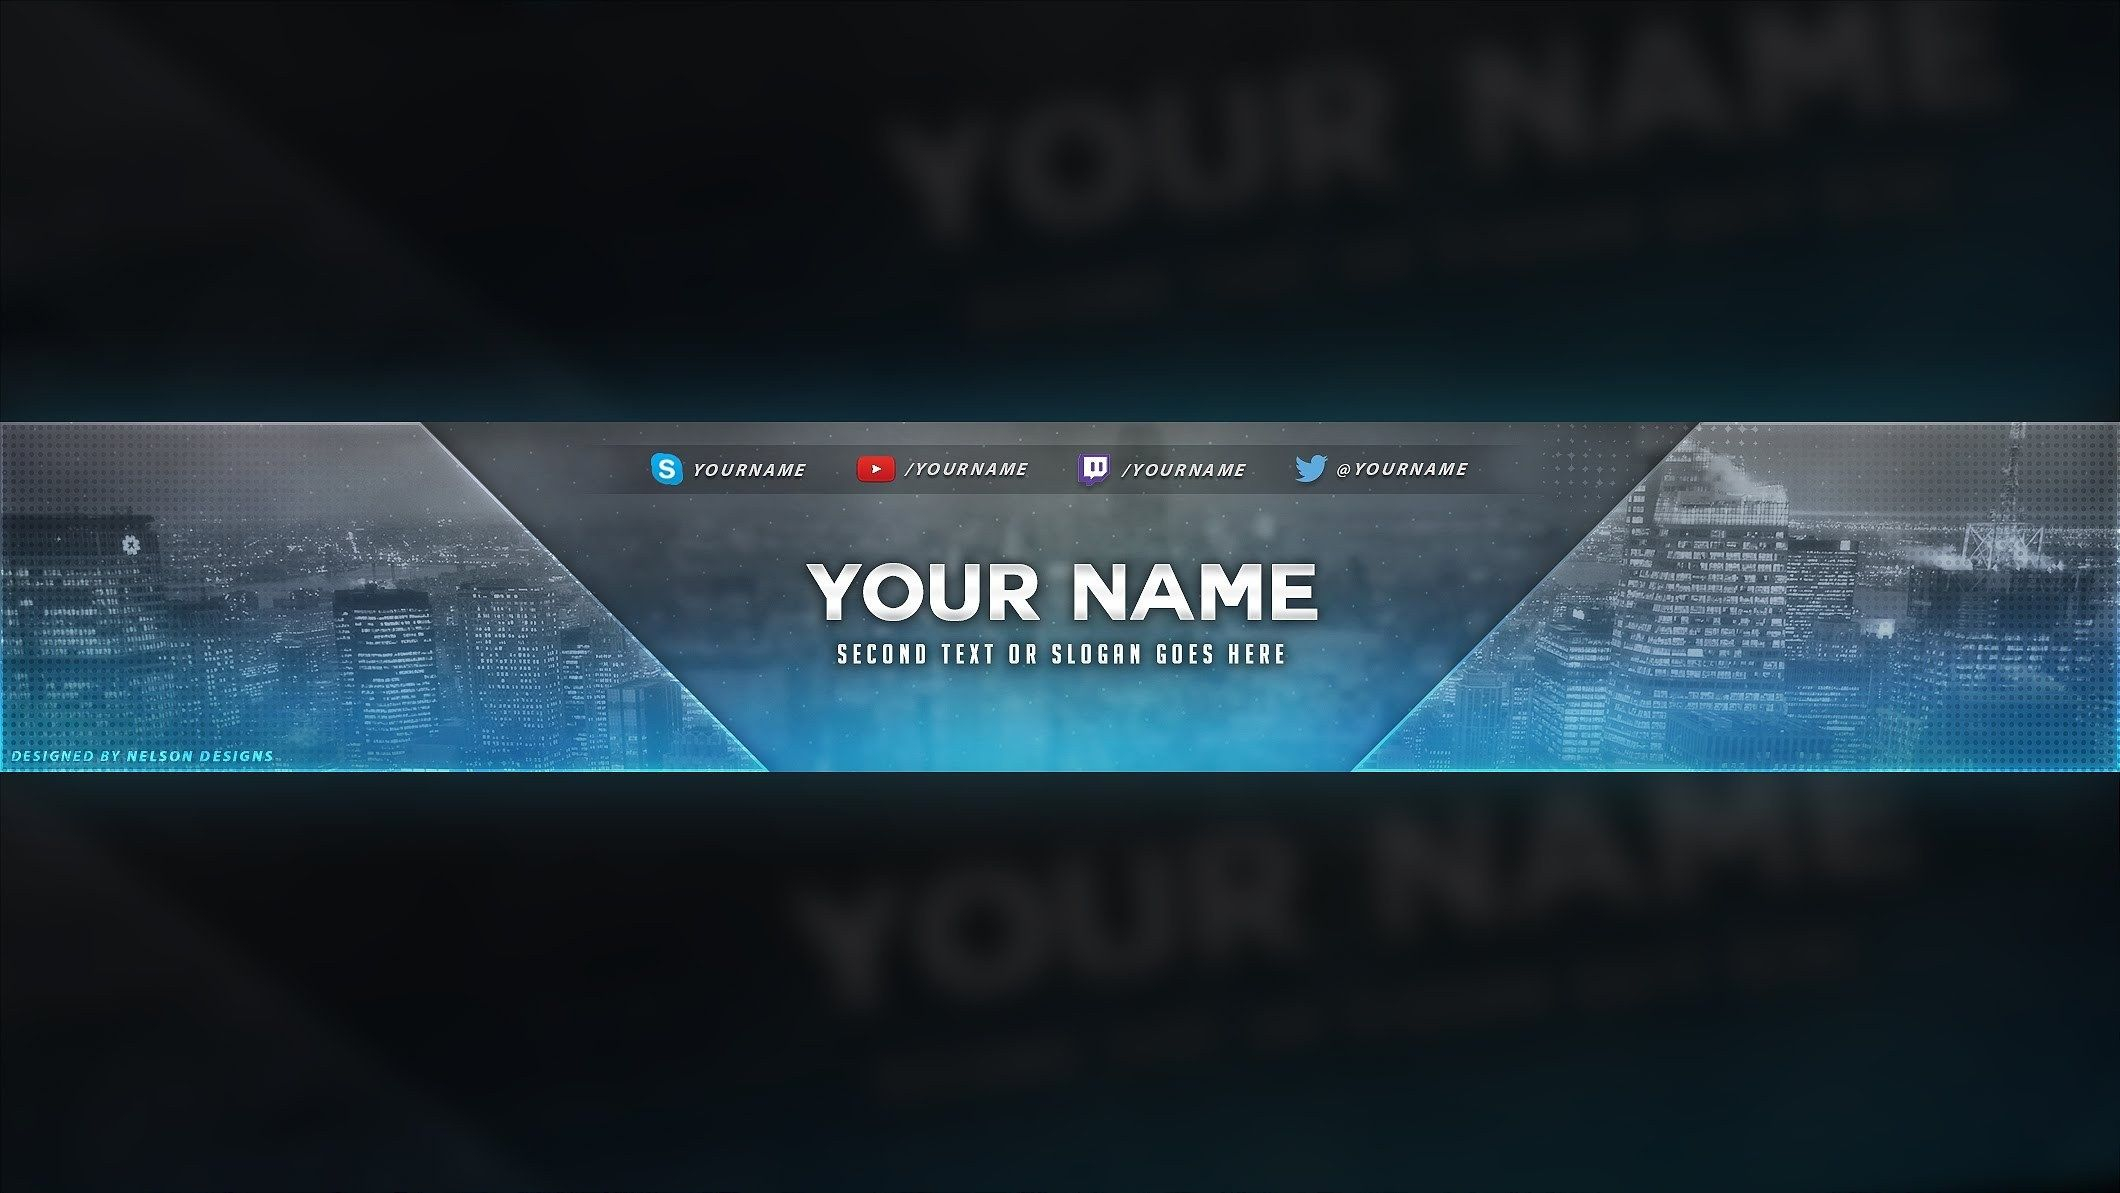 4 Free Youtube Banner Psd Template Designs – Social Media Throughout Banner Template For Photoshop